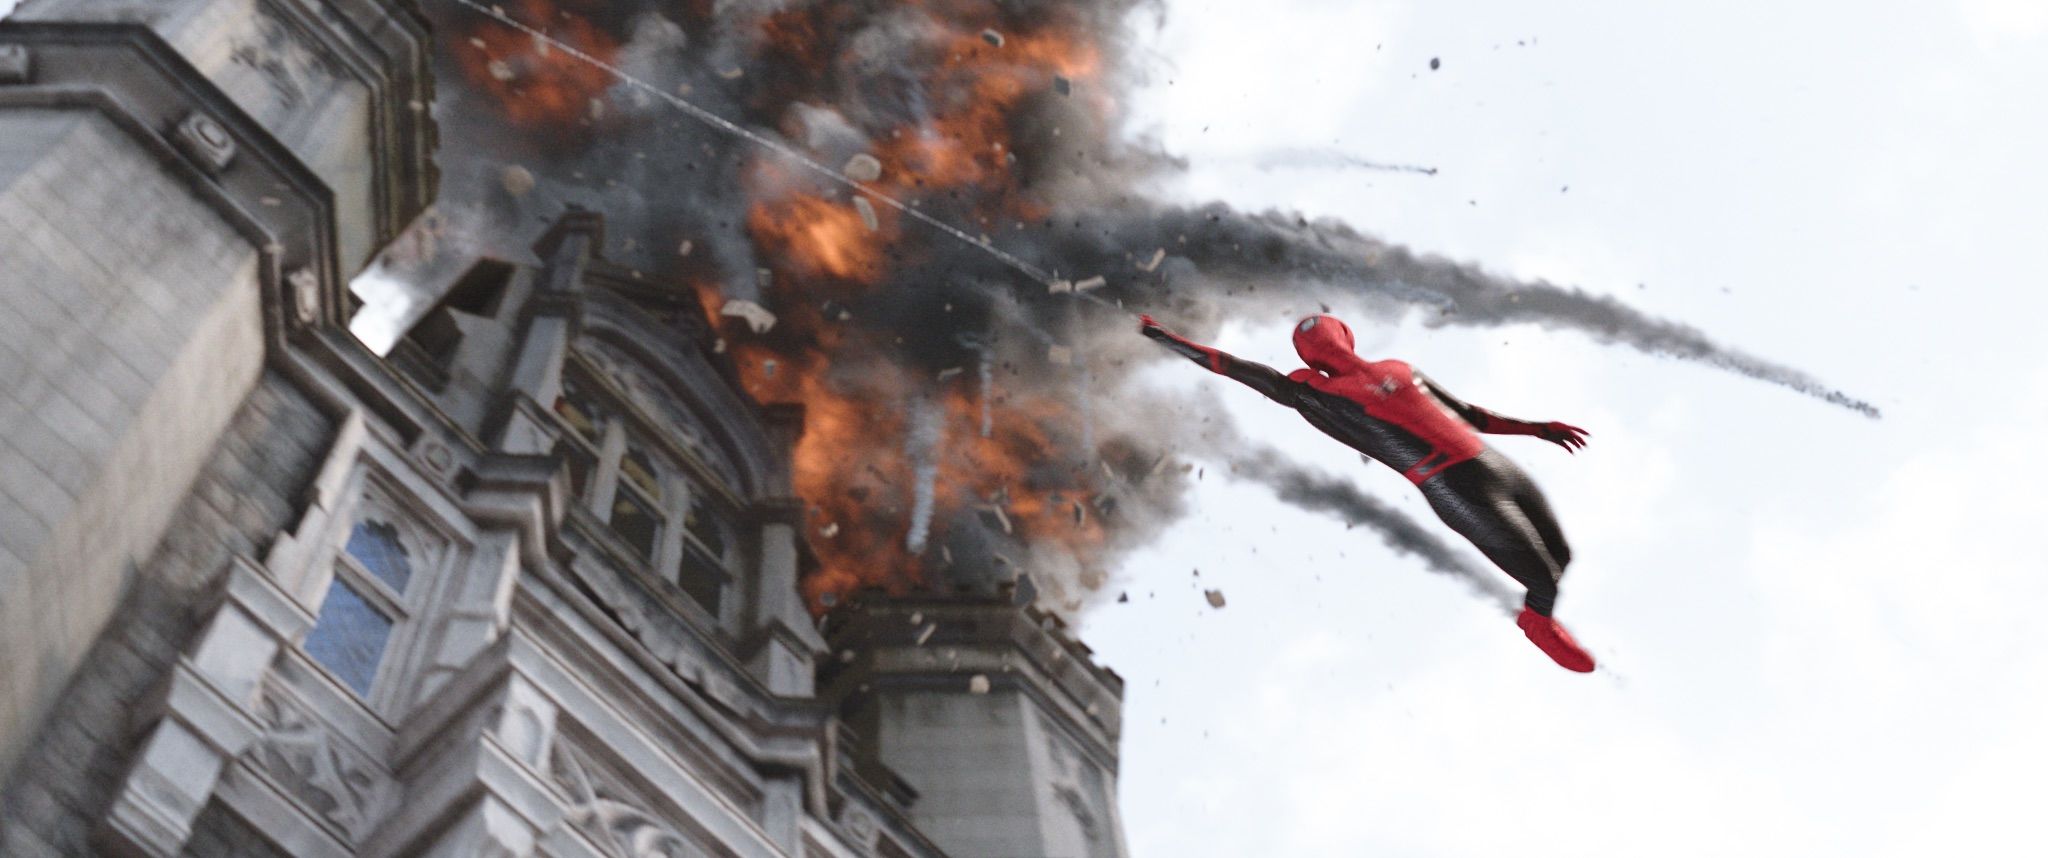 Finding a Satisfying End in the 'Spider-Man: Far From Home